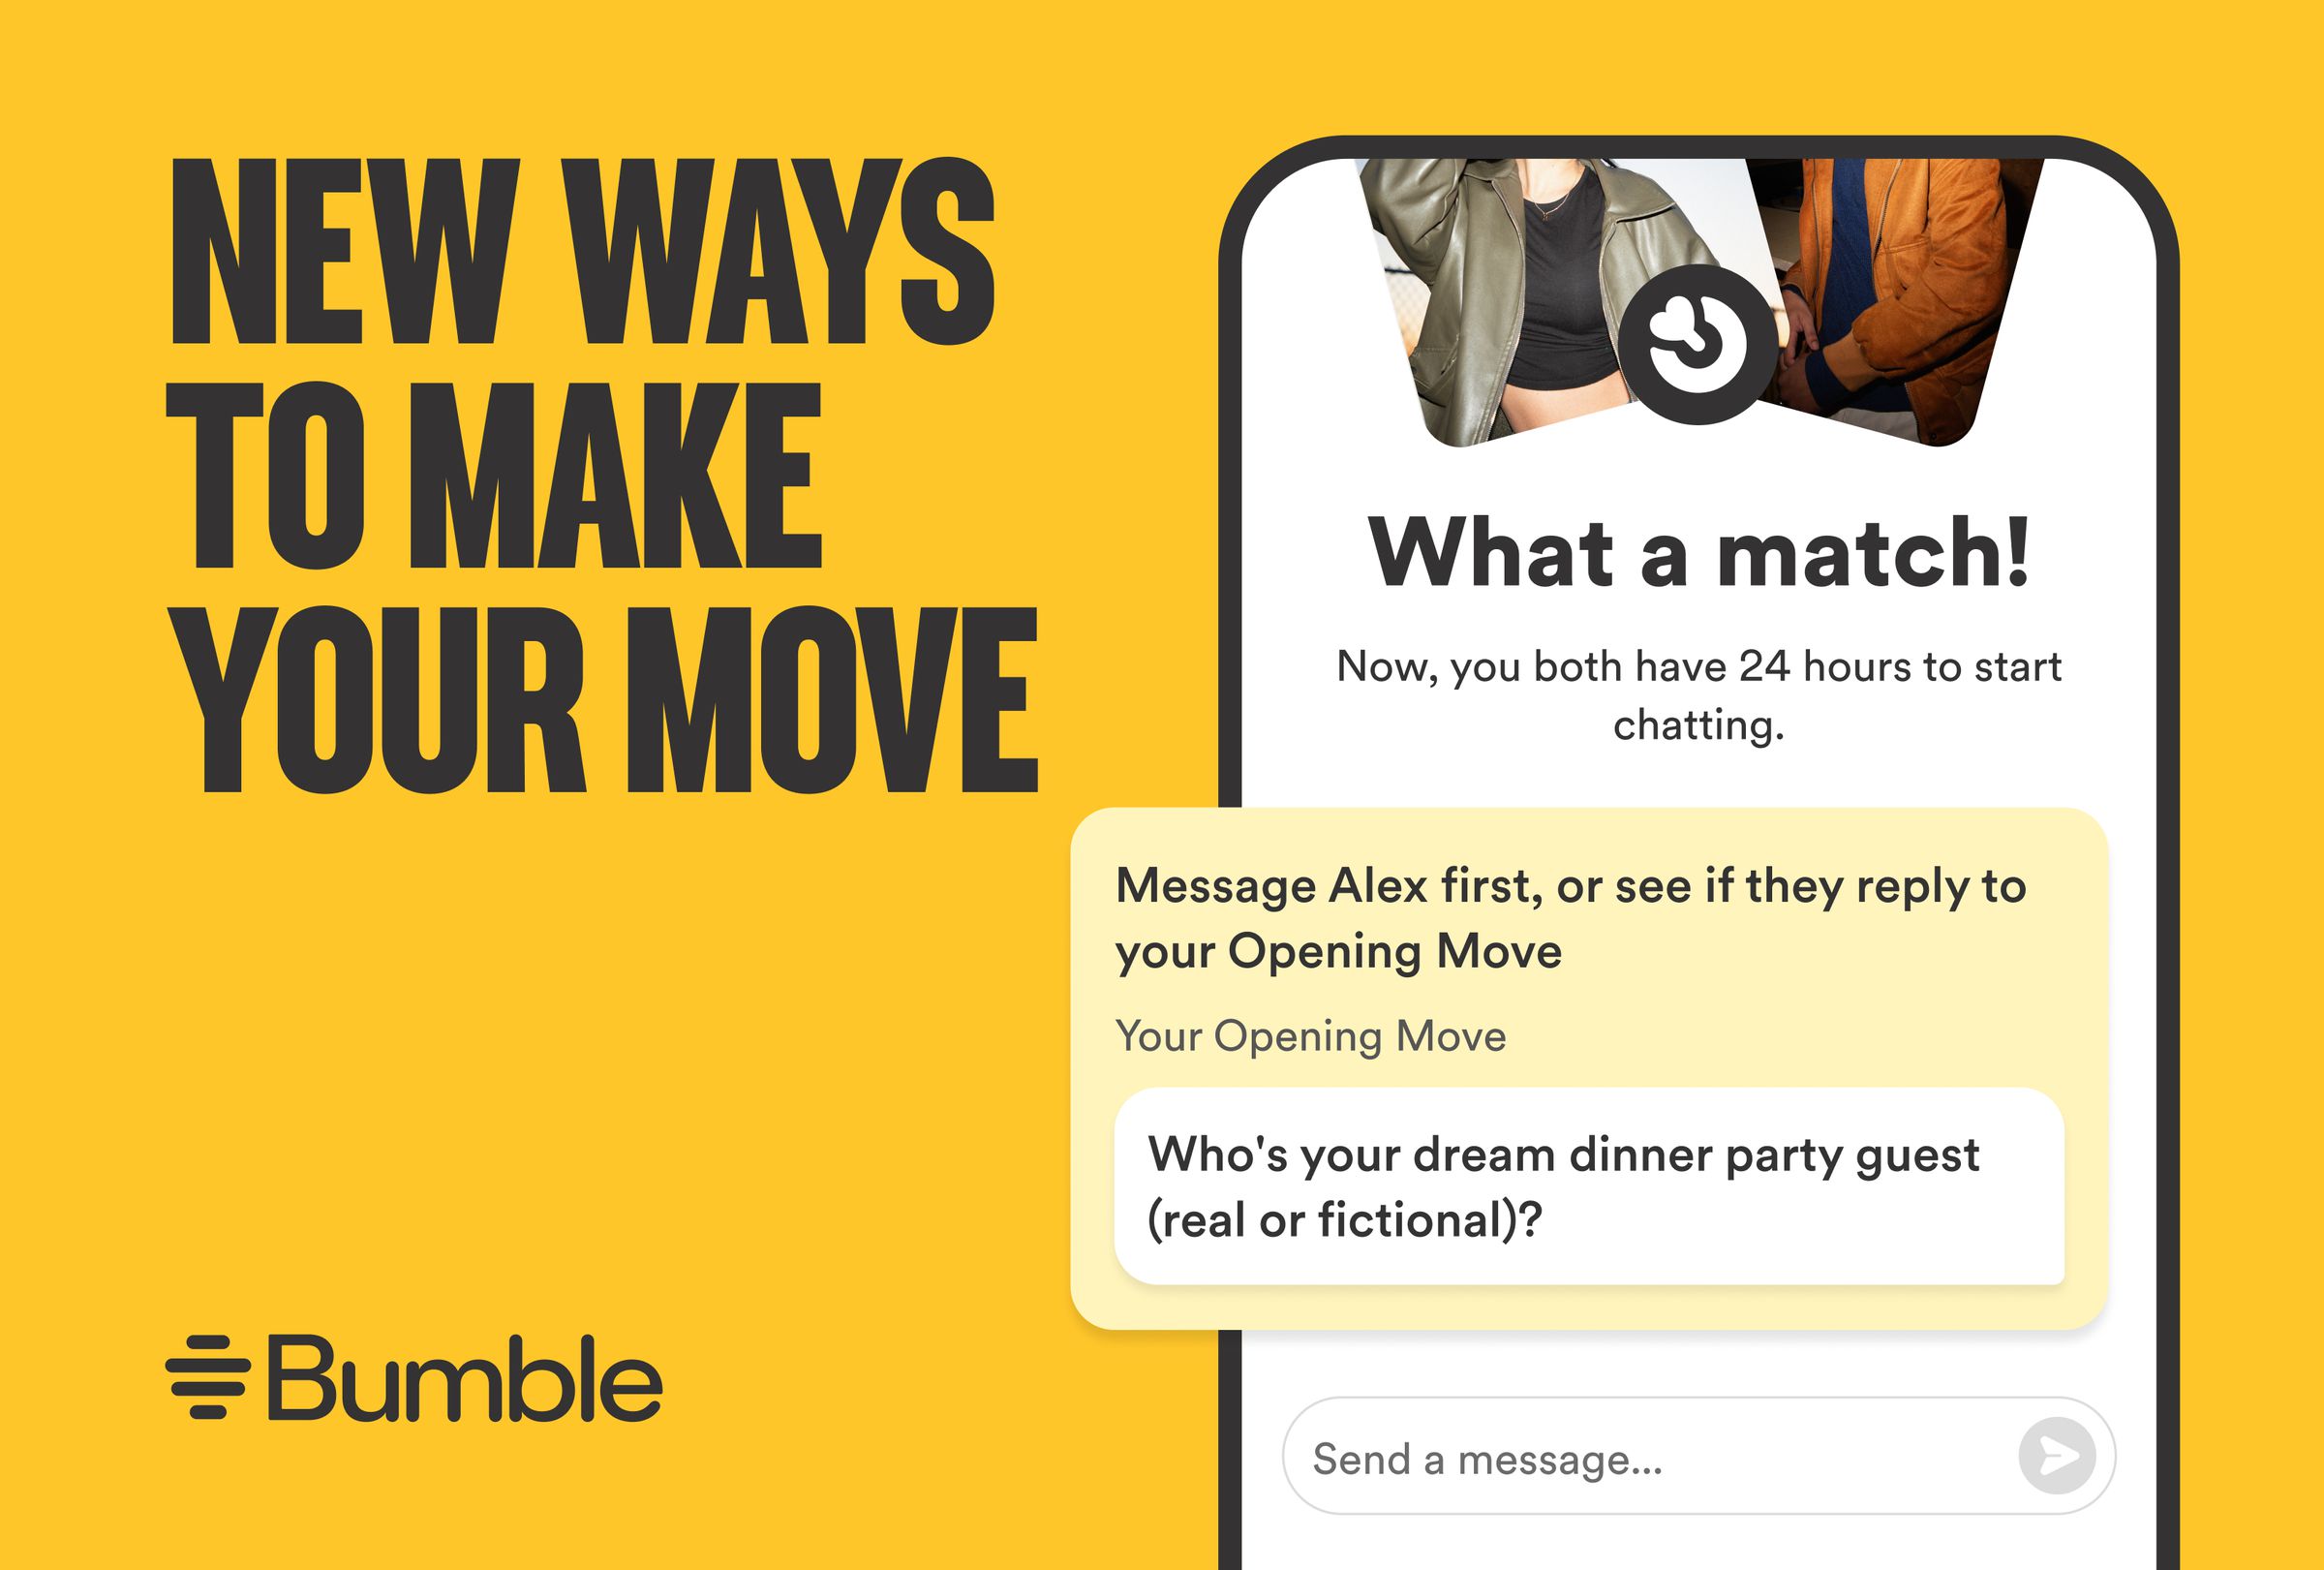 A marketing image showing Bumble’s new opening move feature